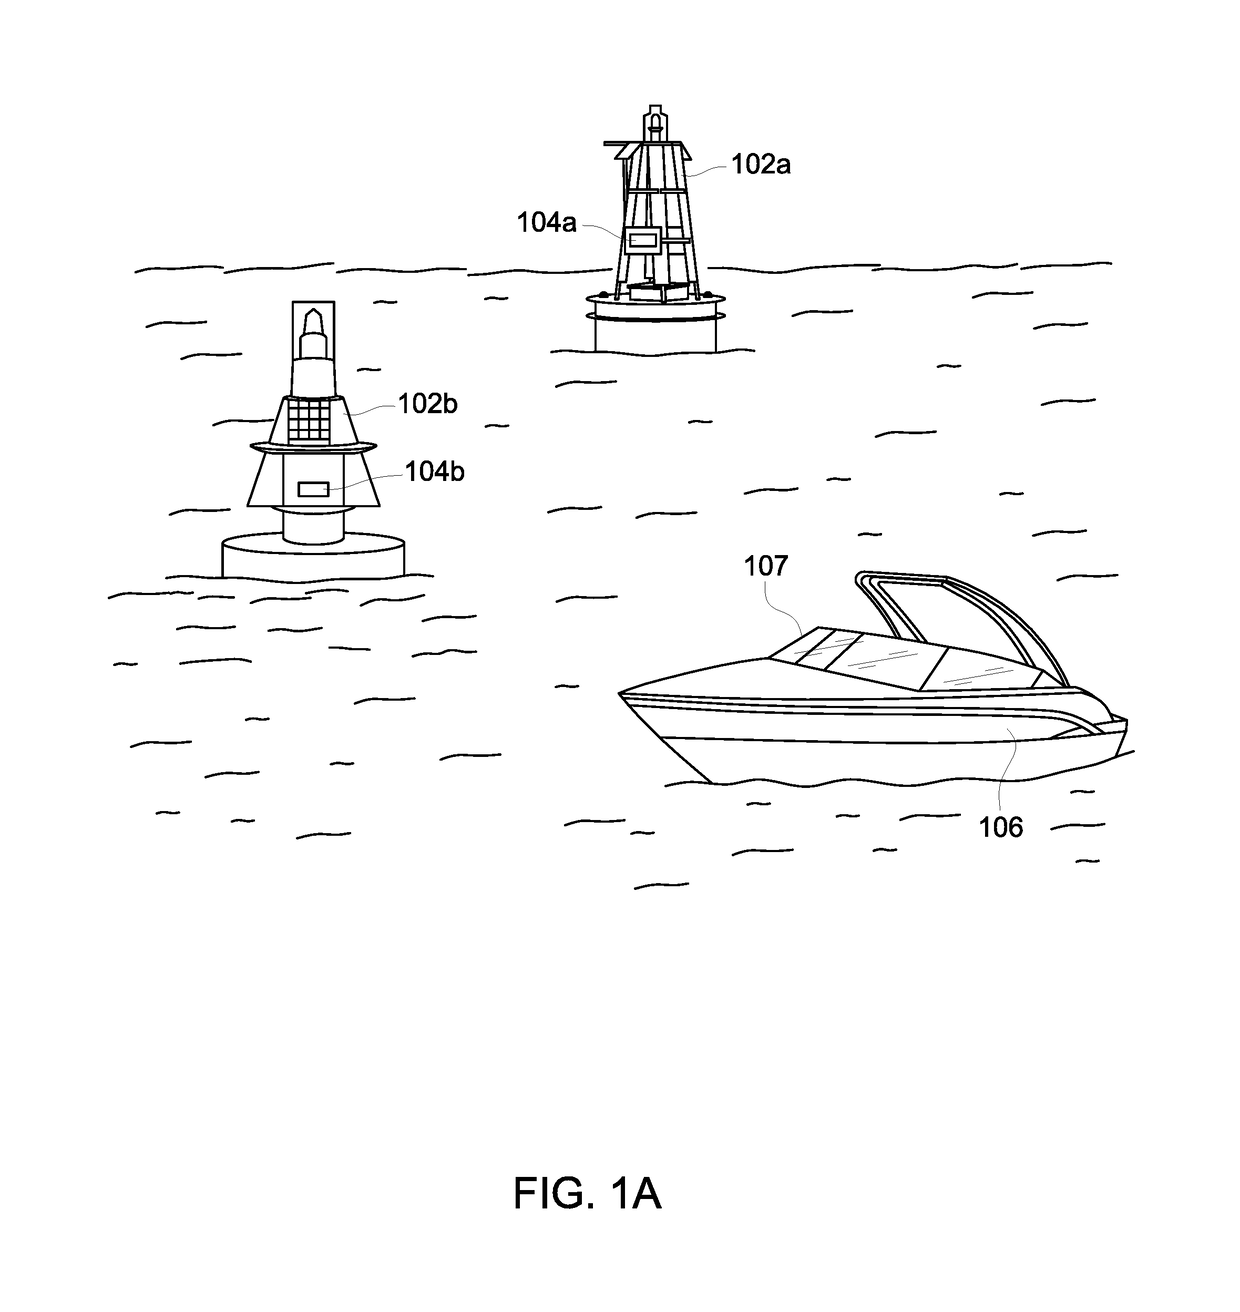 Signaling apparatus and system to identify and locate marine objects and hazards